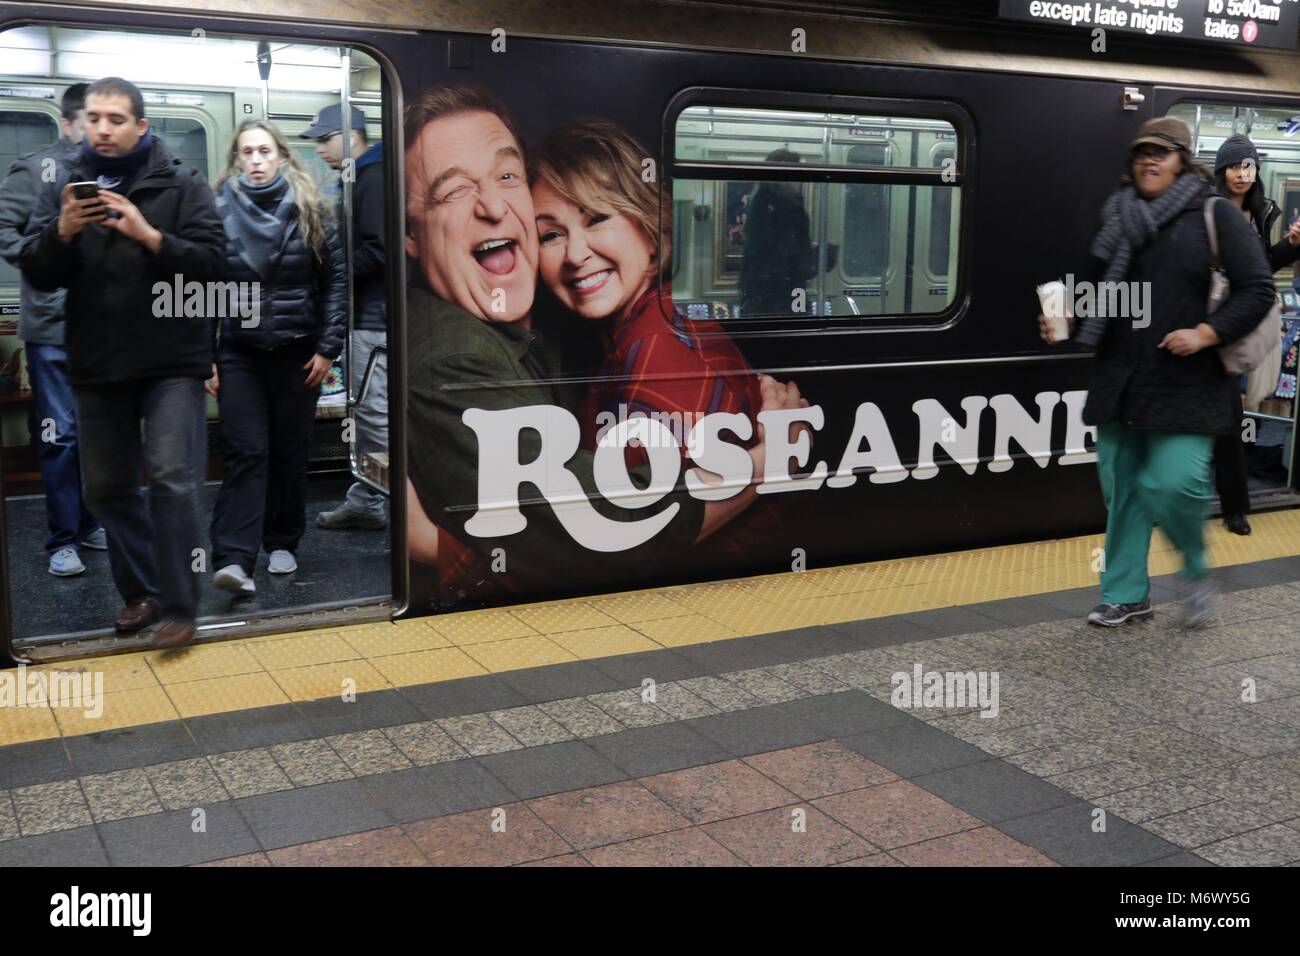 New York, NY, US. 6th. Mar, 2018. Ahead of a reboot of the Nineteen Eighties television comedy series “ROSEANNE” starring Roseanne Barr and John Goodman,the ABC Television Network has transformed a New York City subway car with the interior designed to look like the set of 'Roseanne, with giant portraits of the main characters, the TV family’s patchwork quilt lining the seats, a fireplace and family photos. The 'Roseanne' revival premieres March 27 on the ABC Network. © 2018 G. Ronald Lopez/DigiPixsAgain.us/Alamy Live News Stock Photo